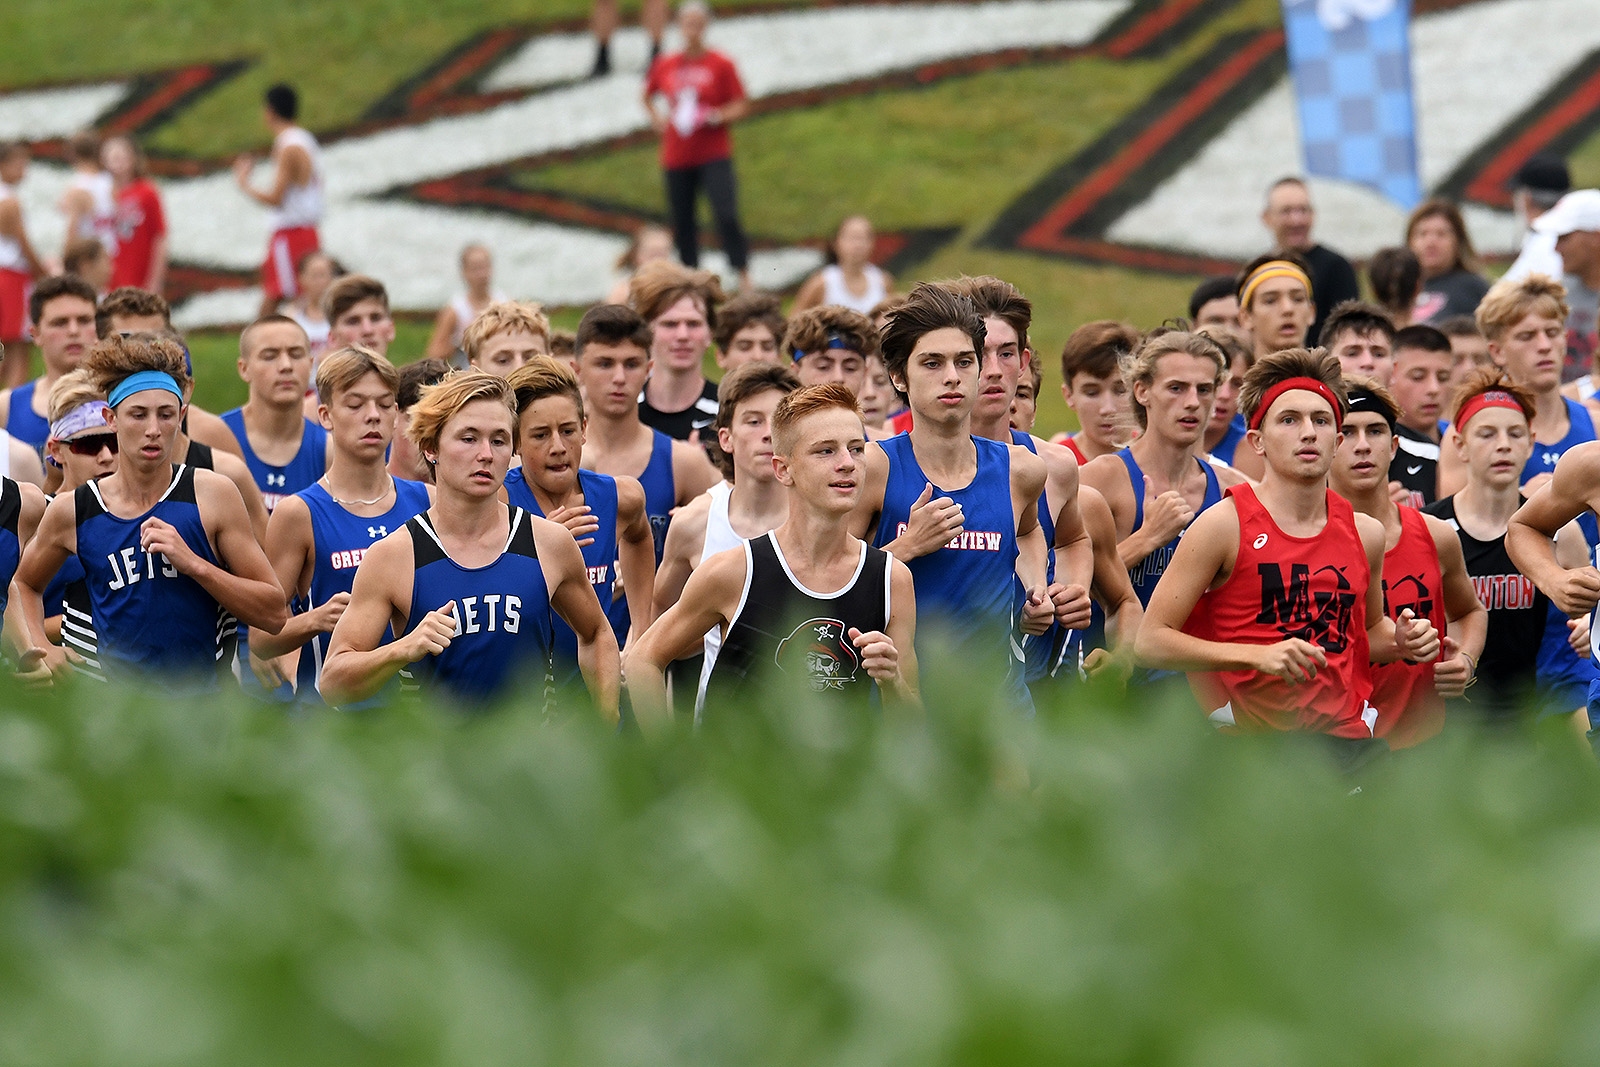 Read more about the article BUCCS HAVE BIG DAY AT ANNUAL HOME MEET